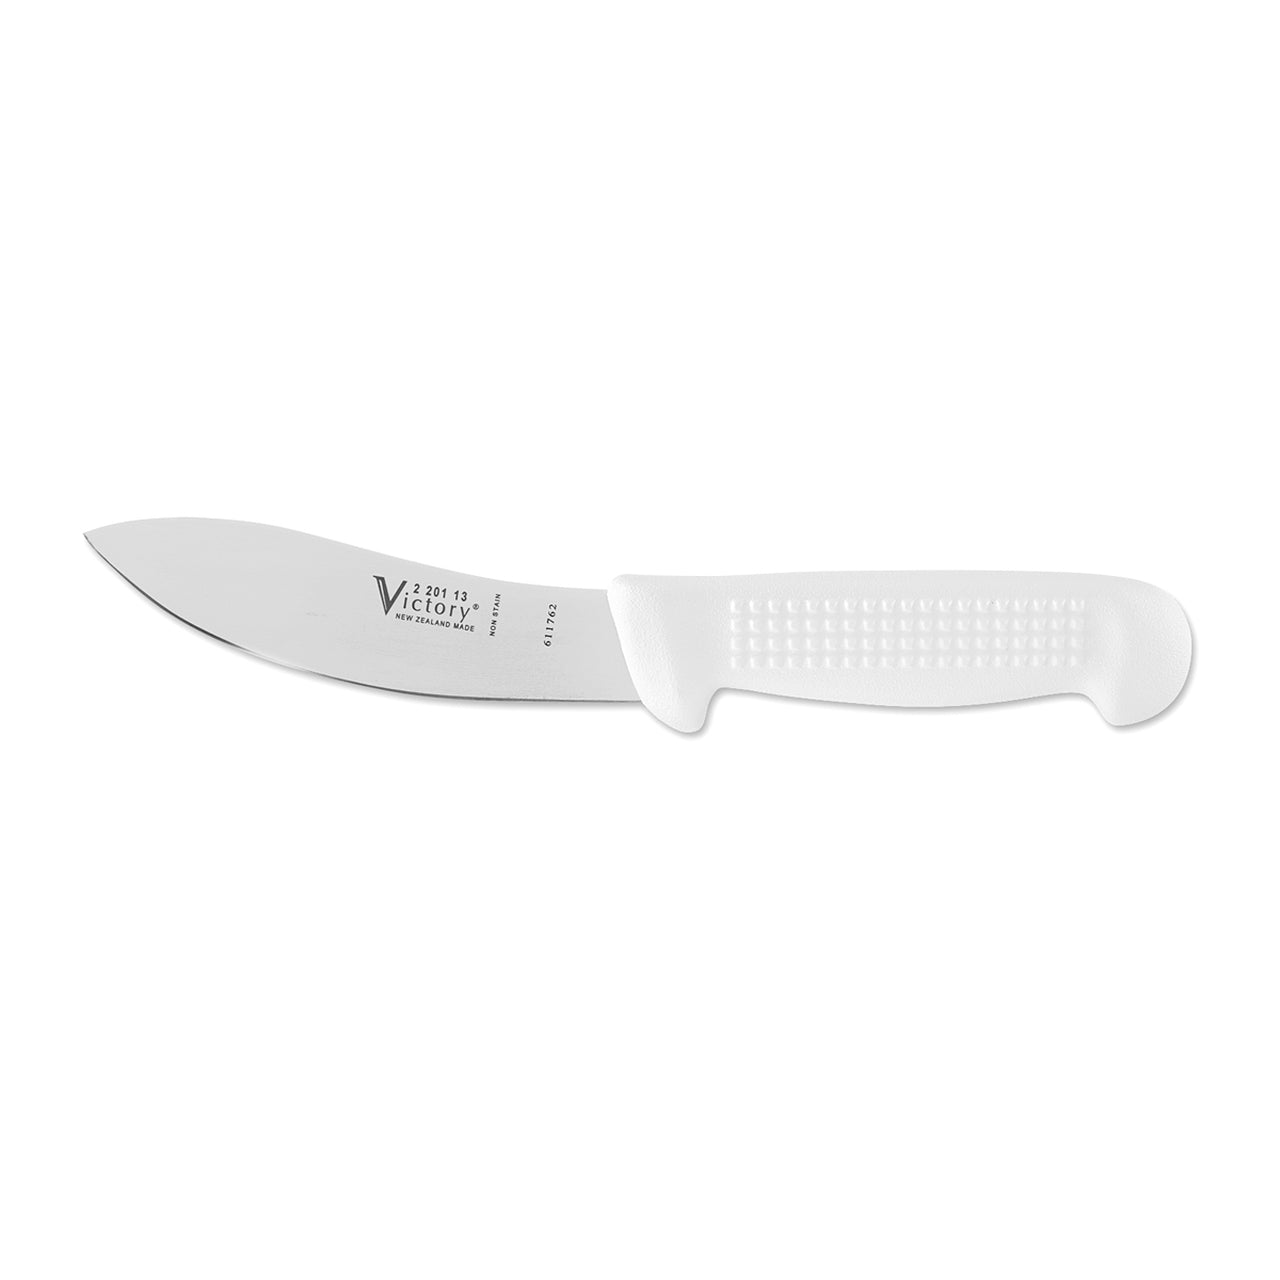 Victory Sheep Skinning Knife 13cm Hang Sell -  - Mansfield Hunting & Fishing - Products to prepare for Corona Virus